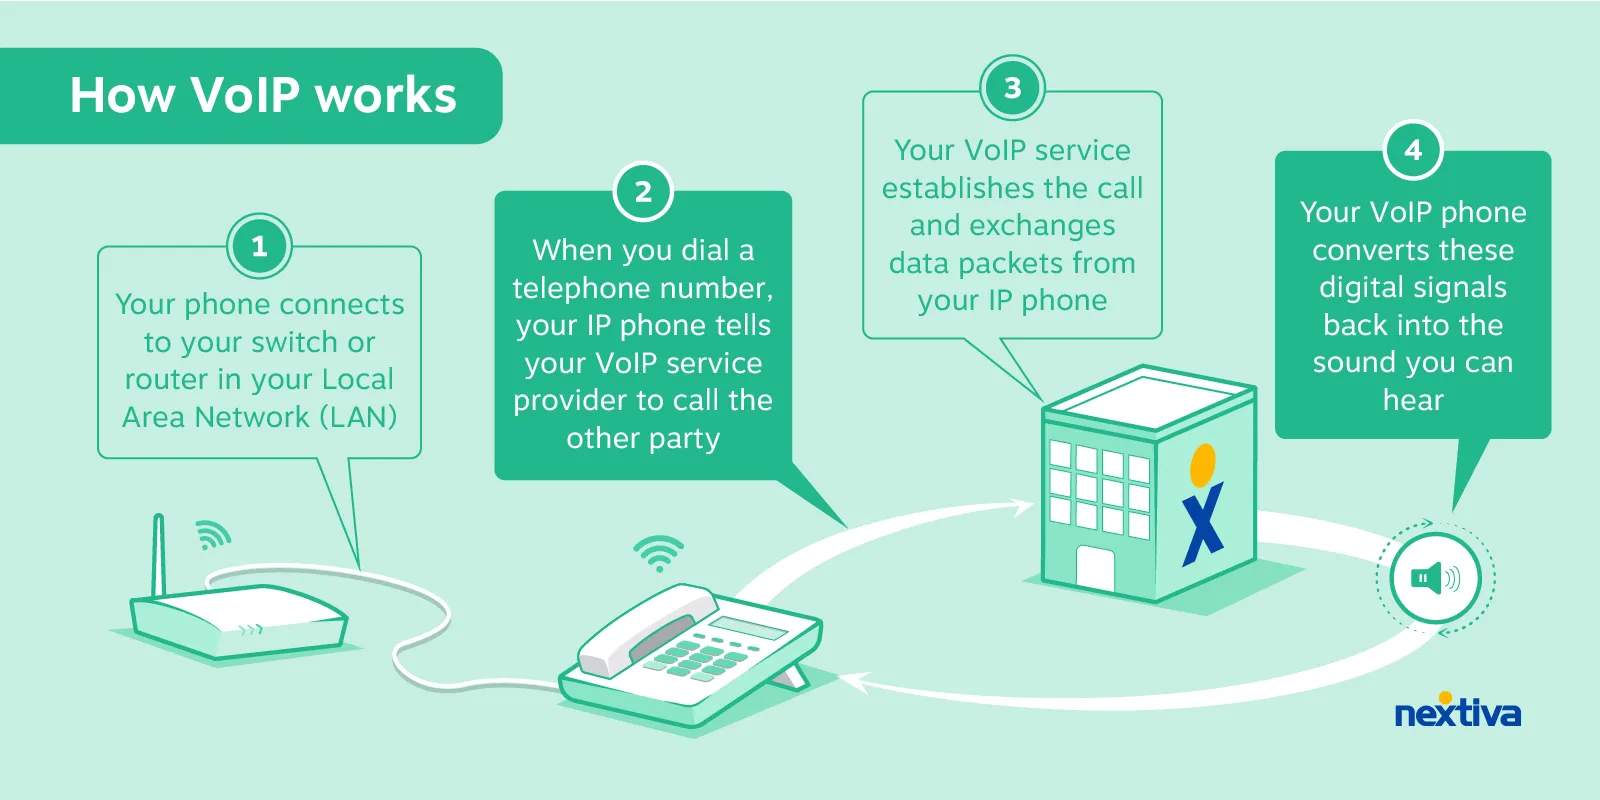 A diagram showing how VoIP works